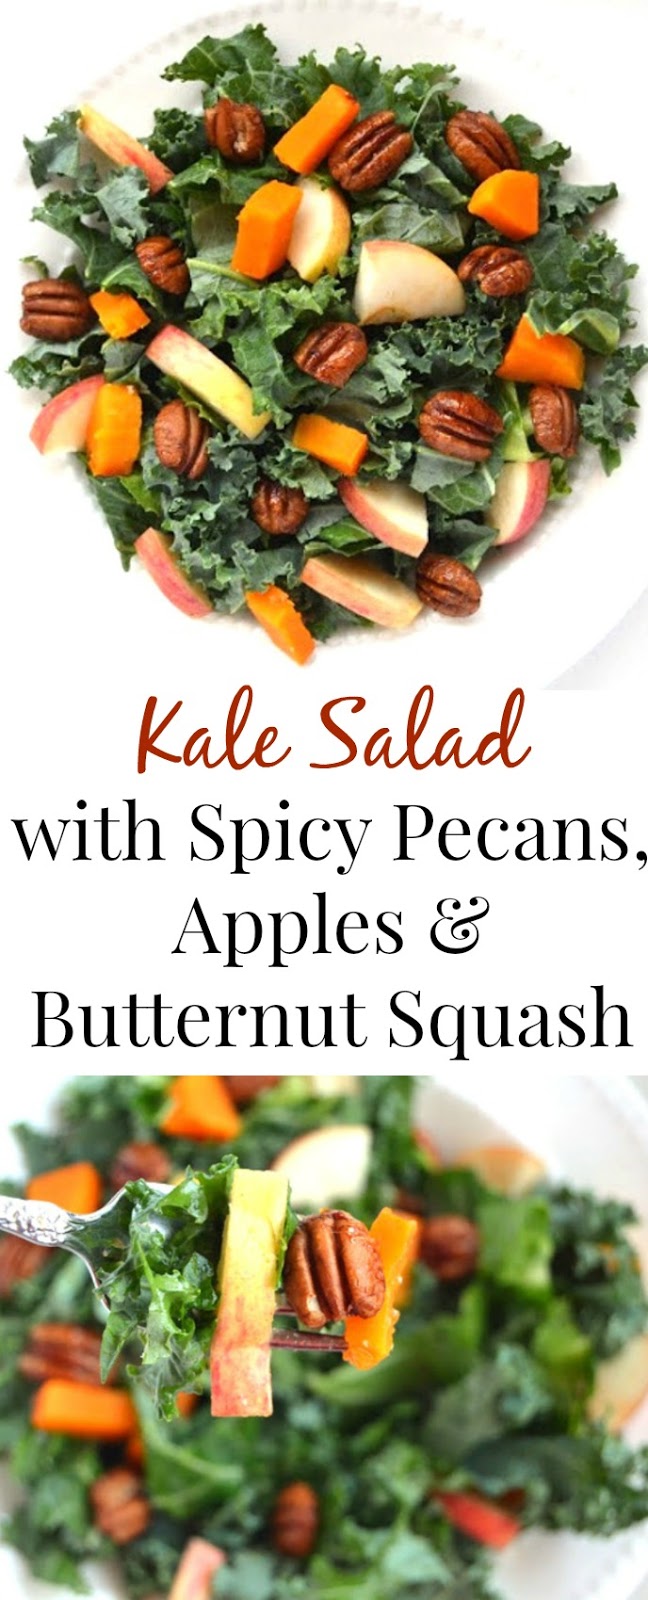 Kale Salad with Spicy Pecans, Apples and Butternut Squash is the perfect fall salad that is topped with an apple cider vinaigrette!  www.nutritionistreviews.com